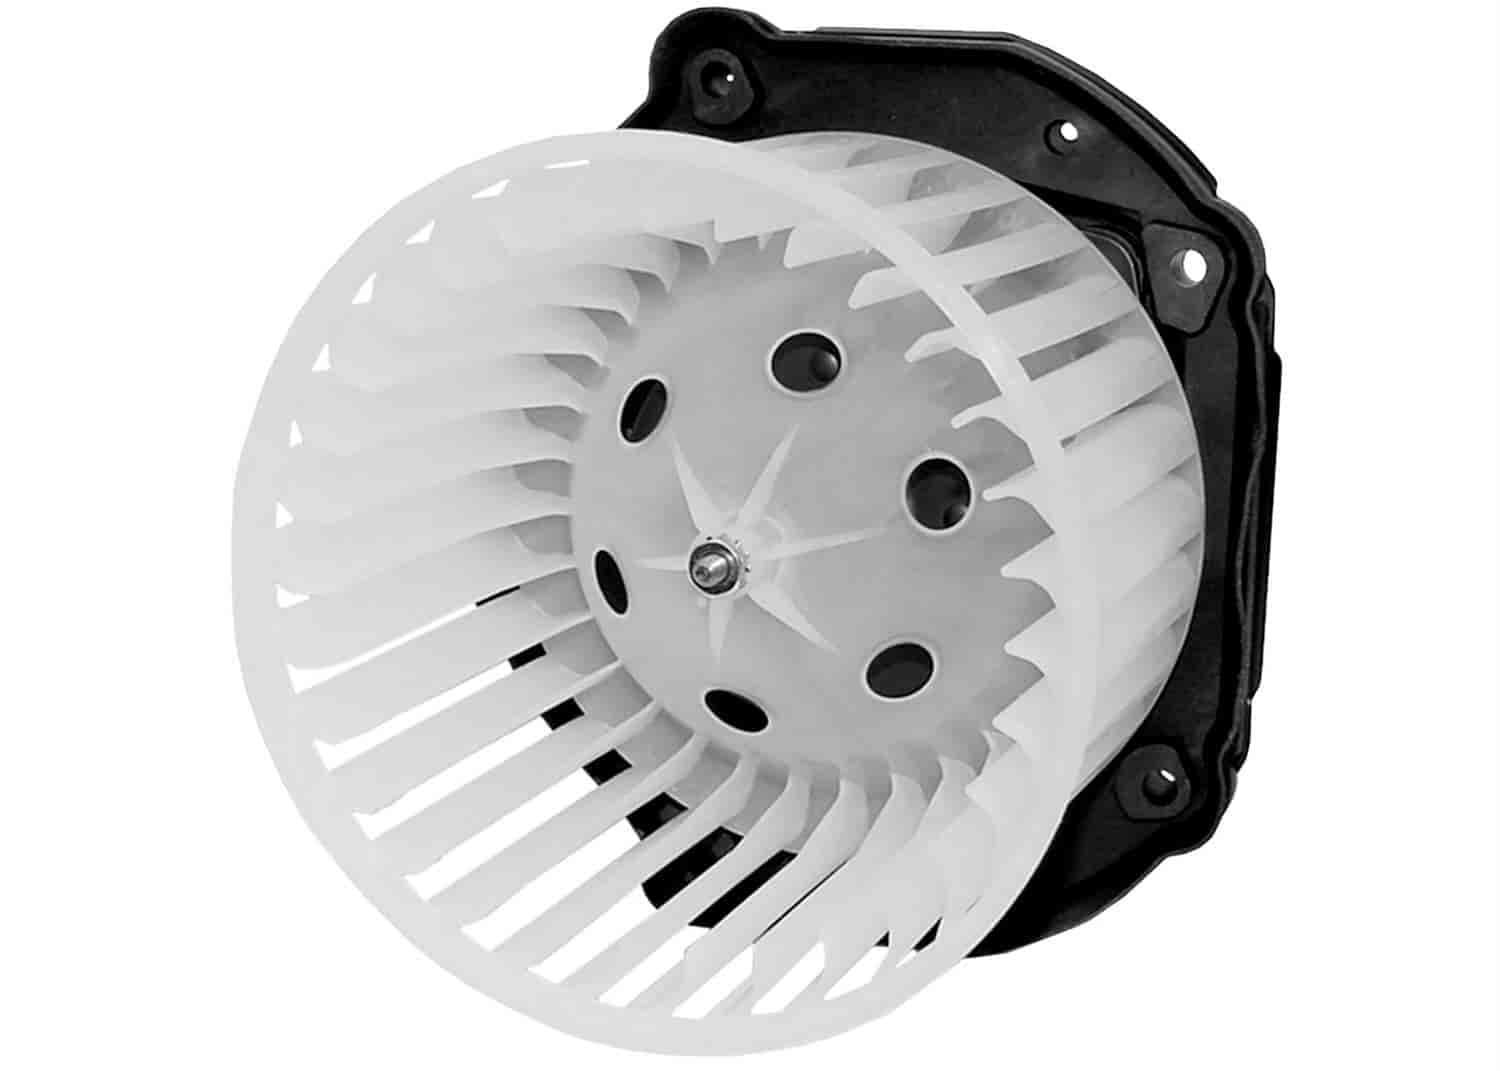 Heating and A/C Blower Motor with Wheel Fits Select 1997-2000 GM Trucks, SUVs